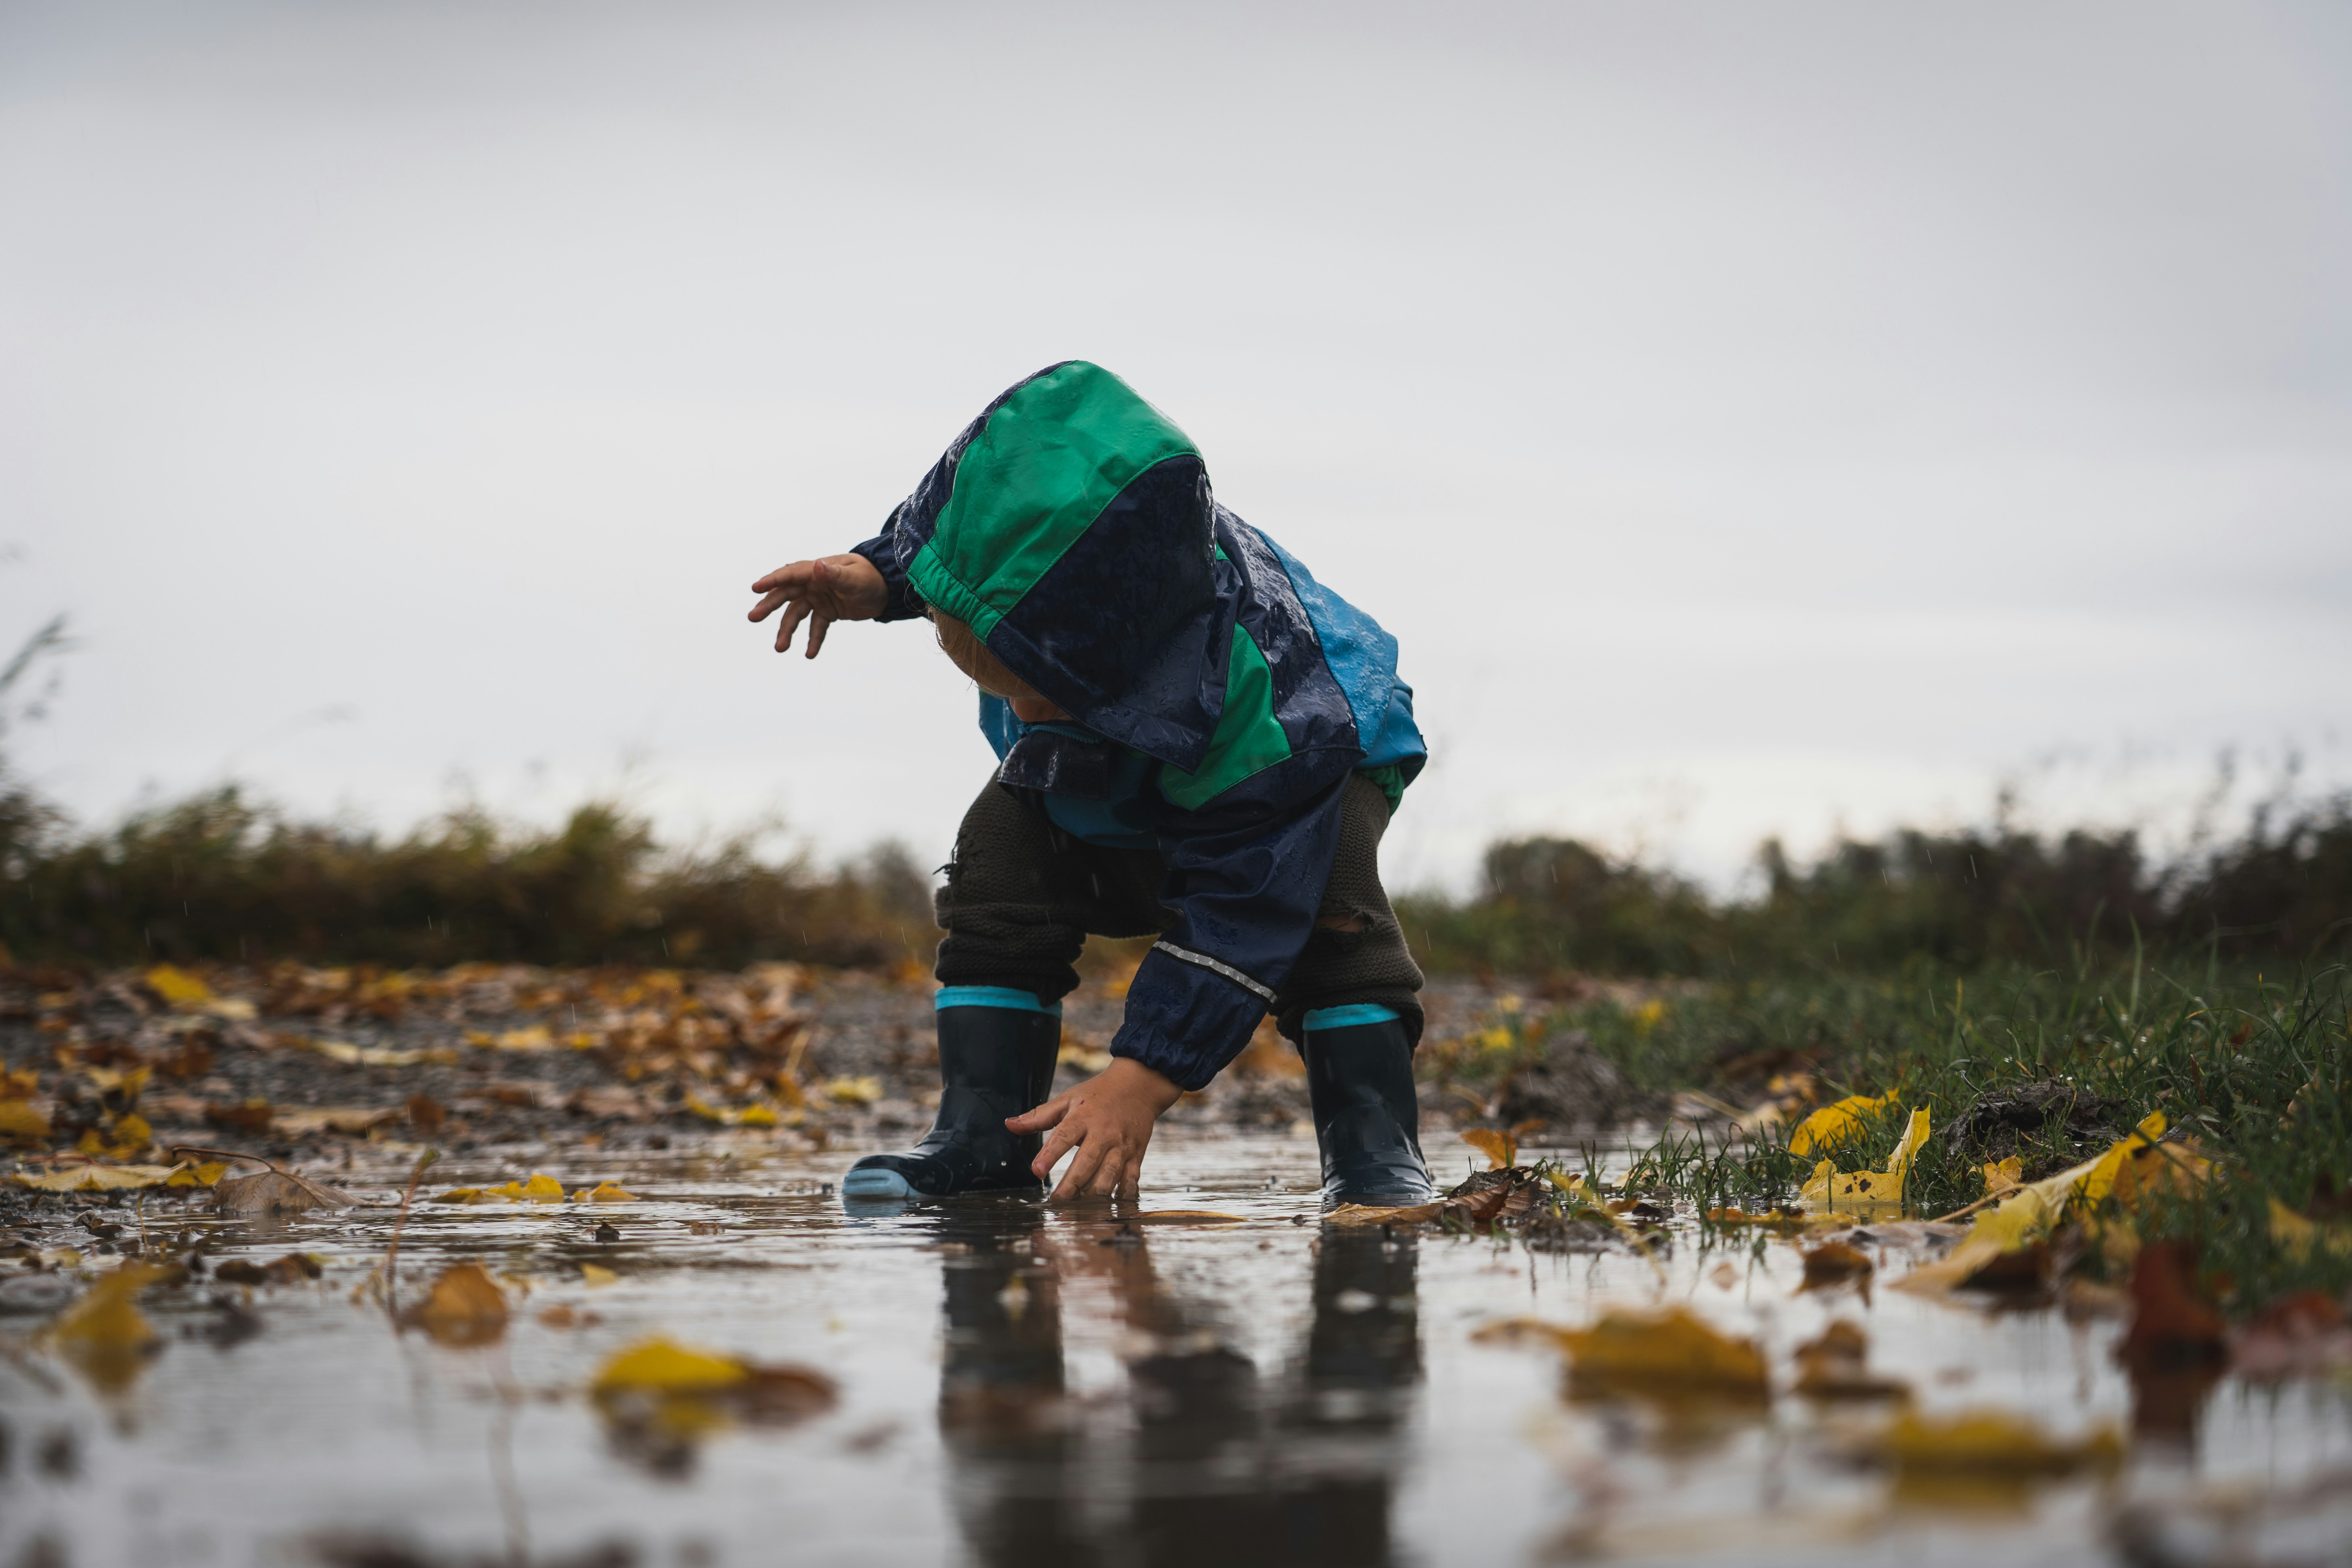 Cute little child playing in a puddle during rain